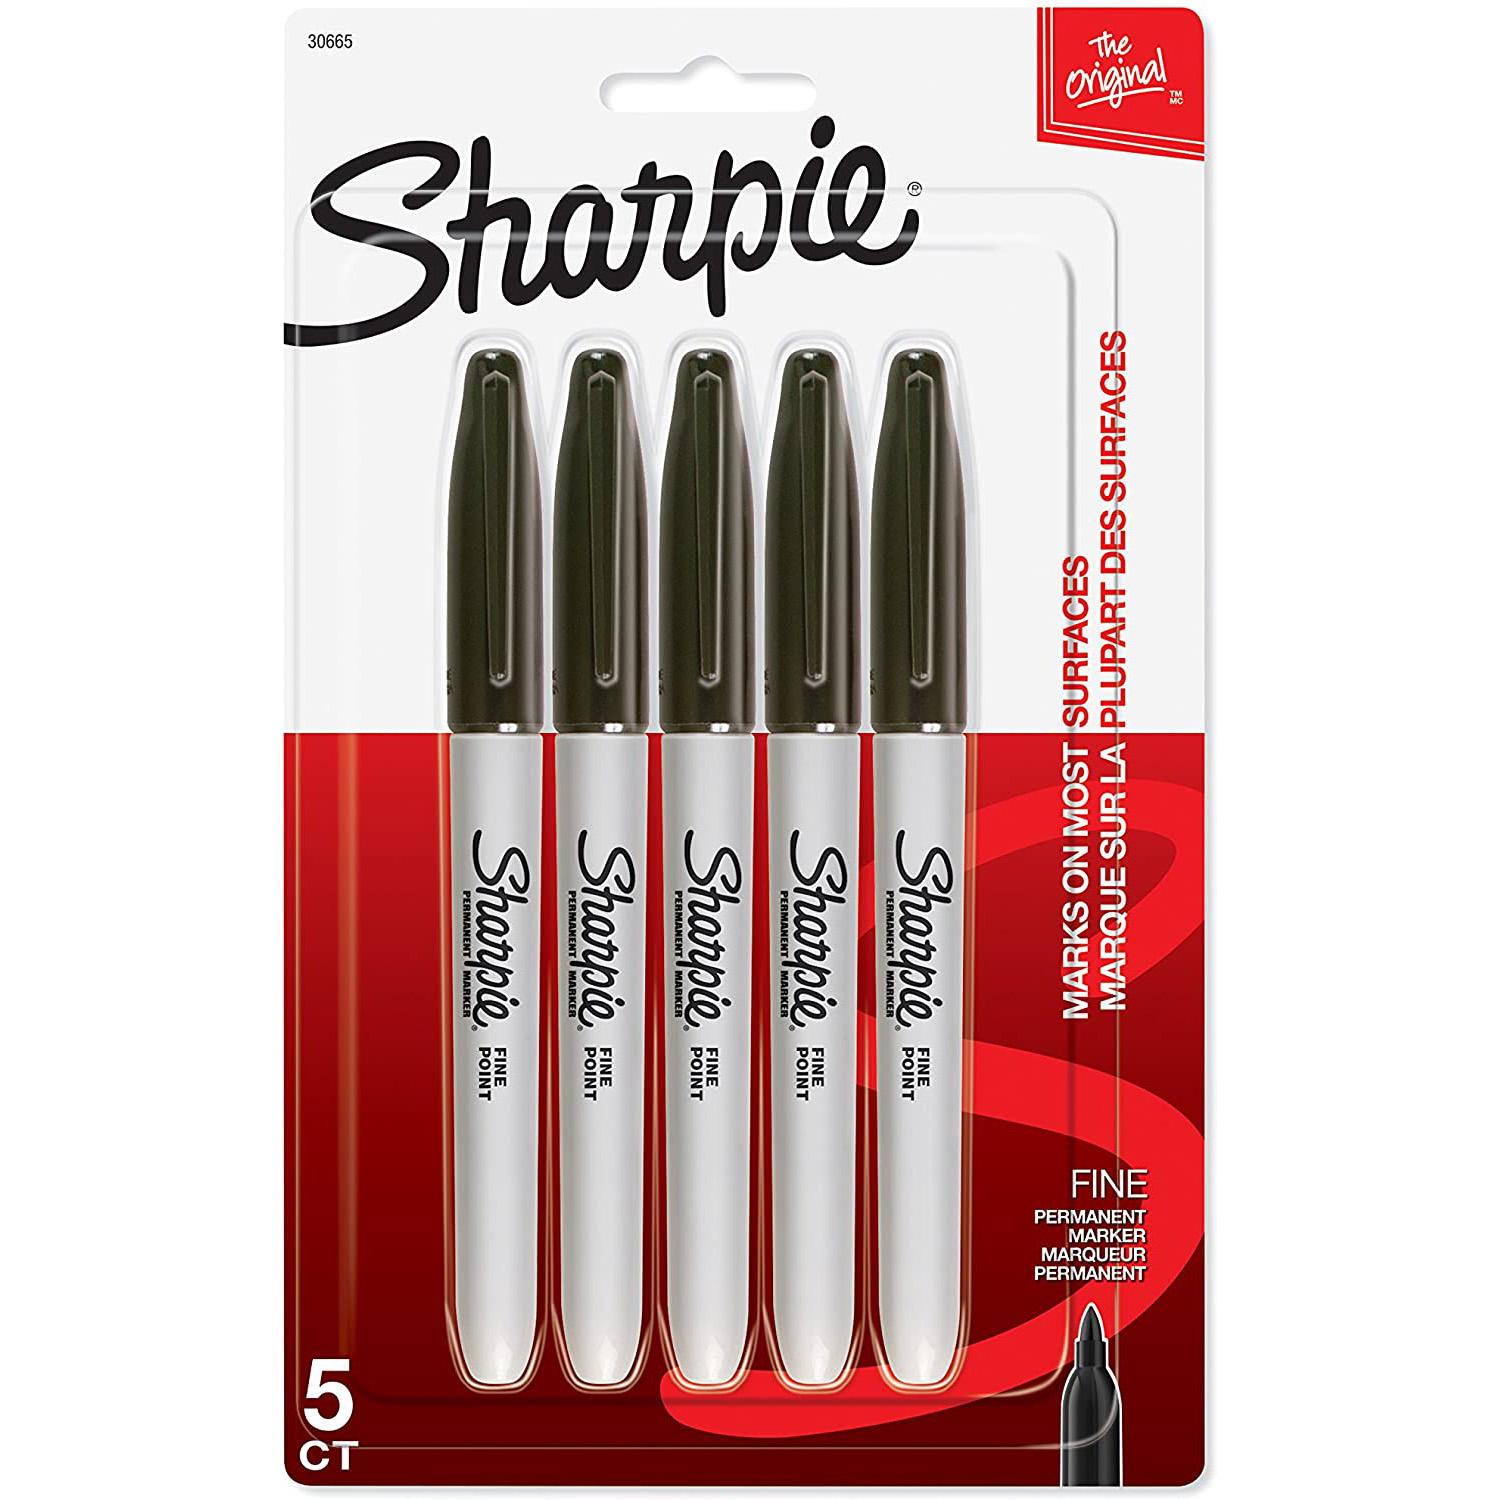 5 Sharpie Fine Point Permanent Markers for $2.99